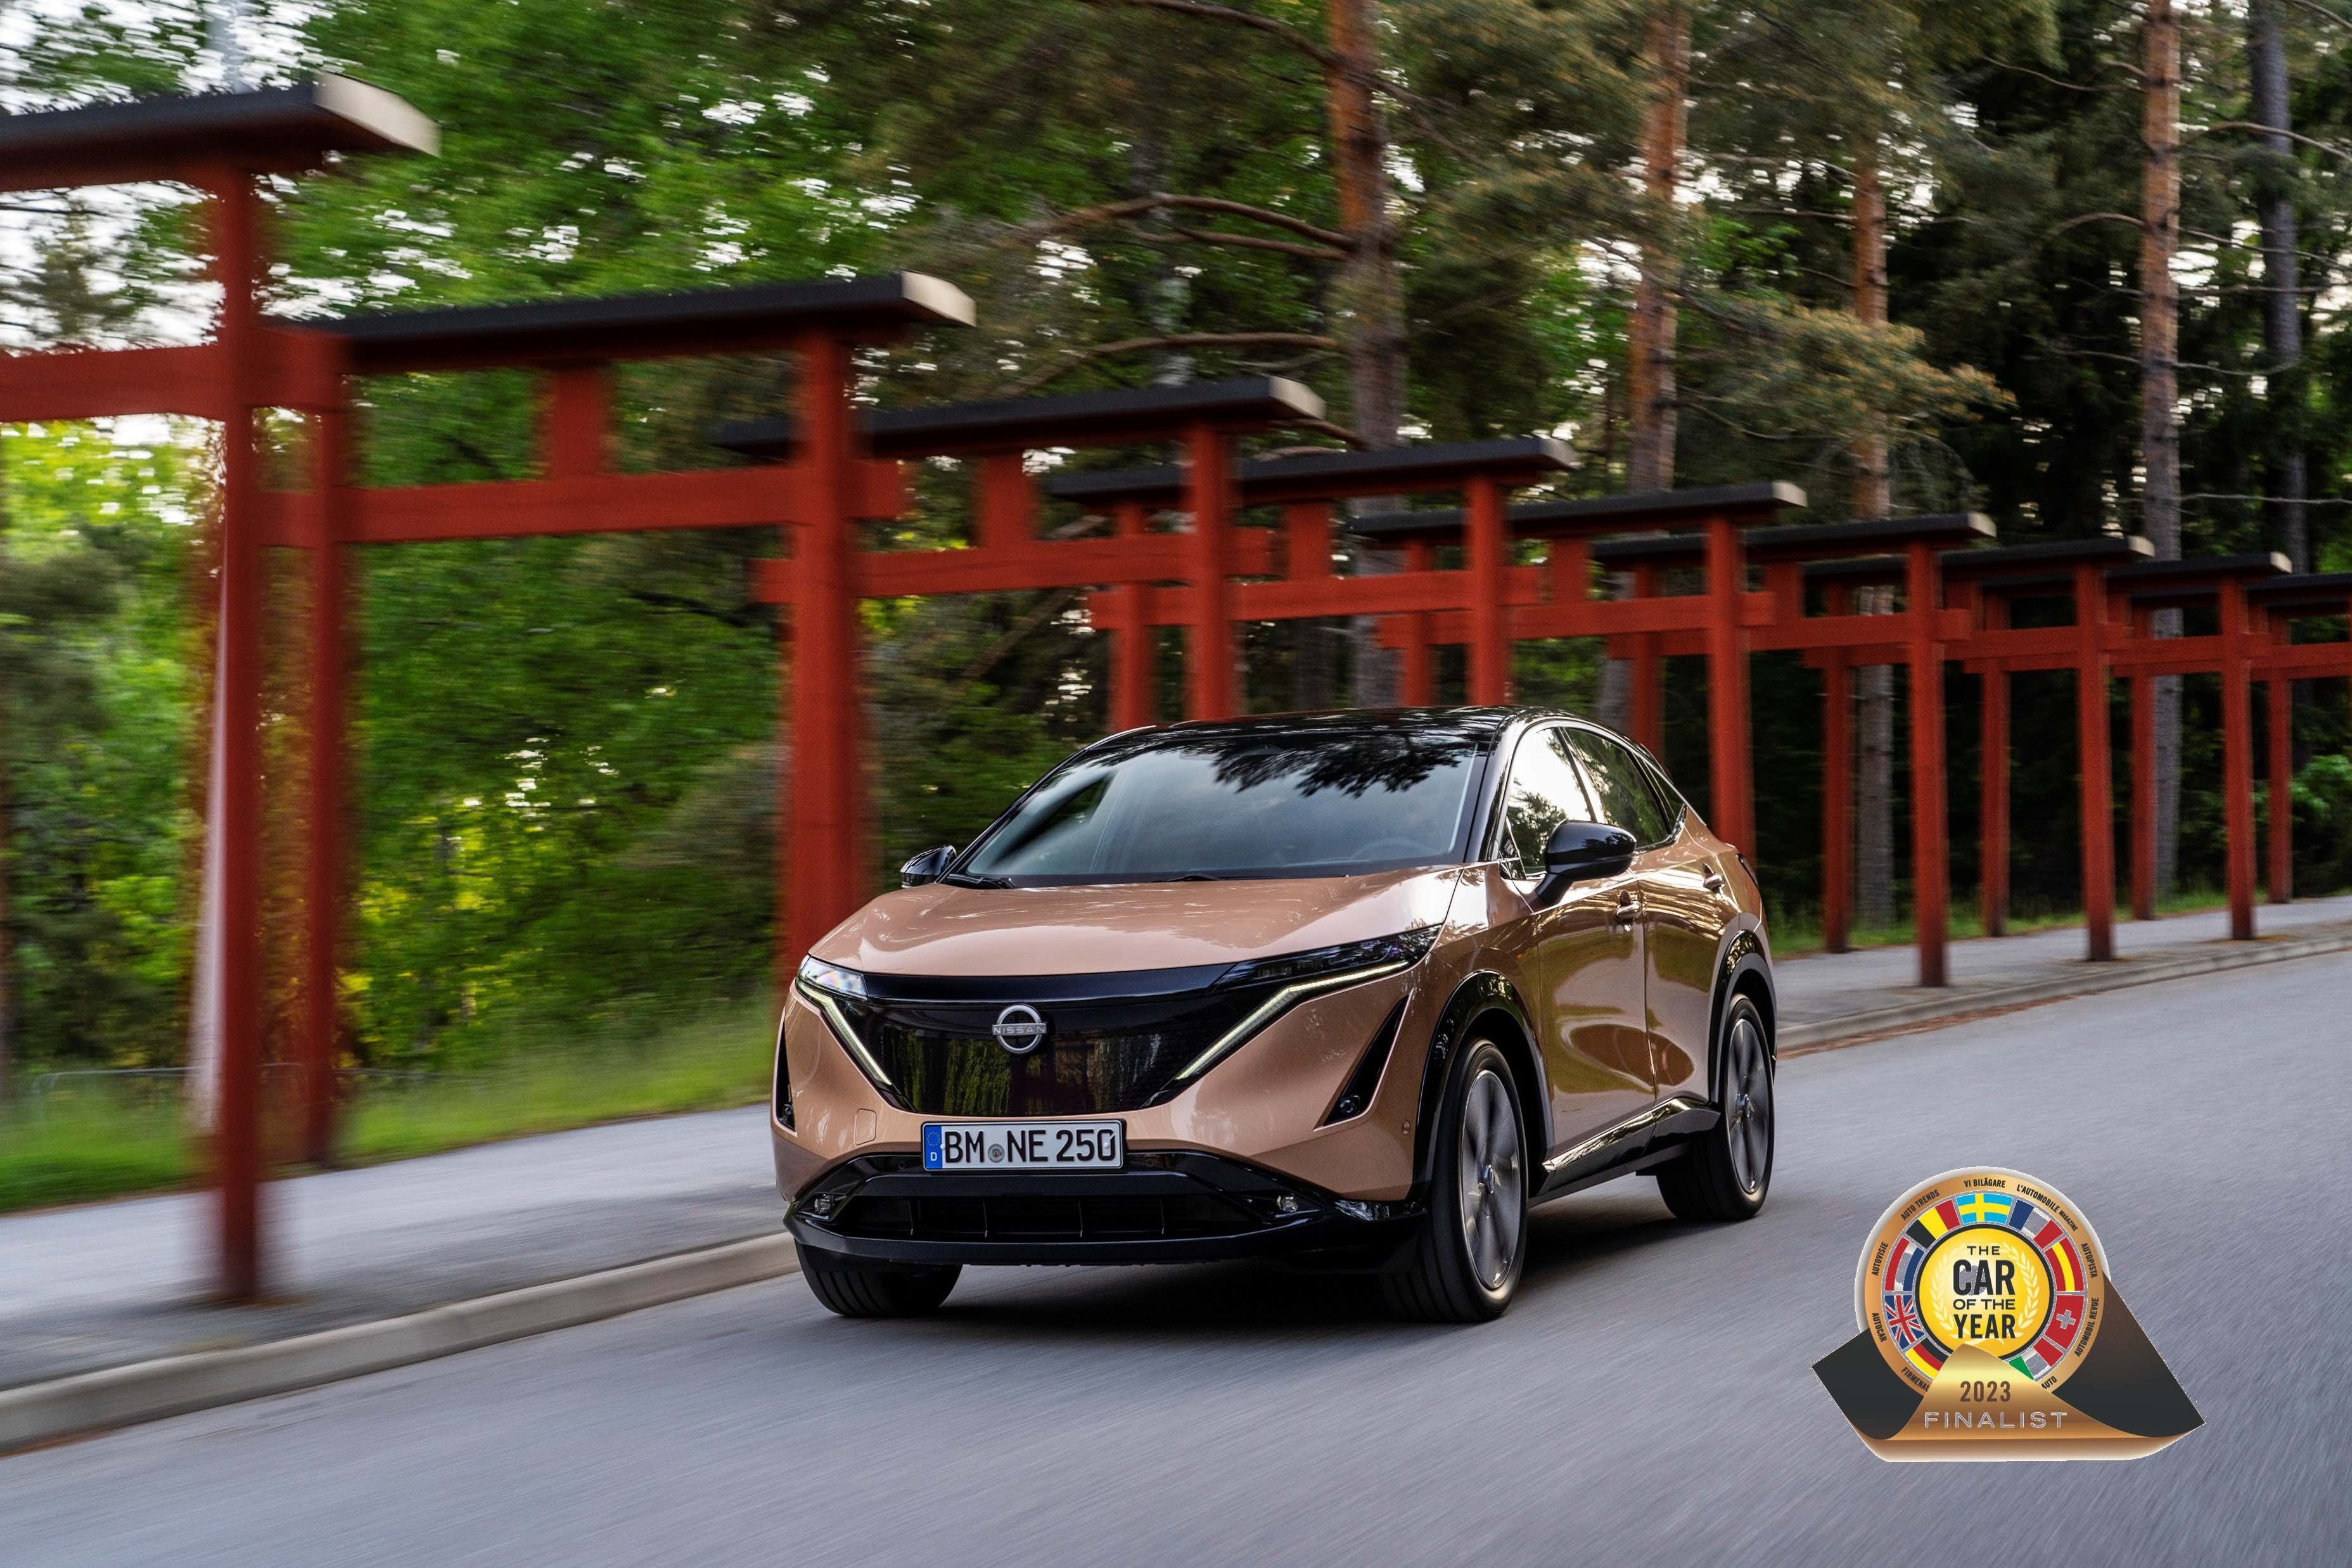 The all-new Nissan ARIYA has made it on to the shortlist to become Car of the Year 2023